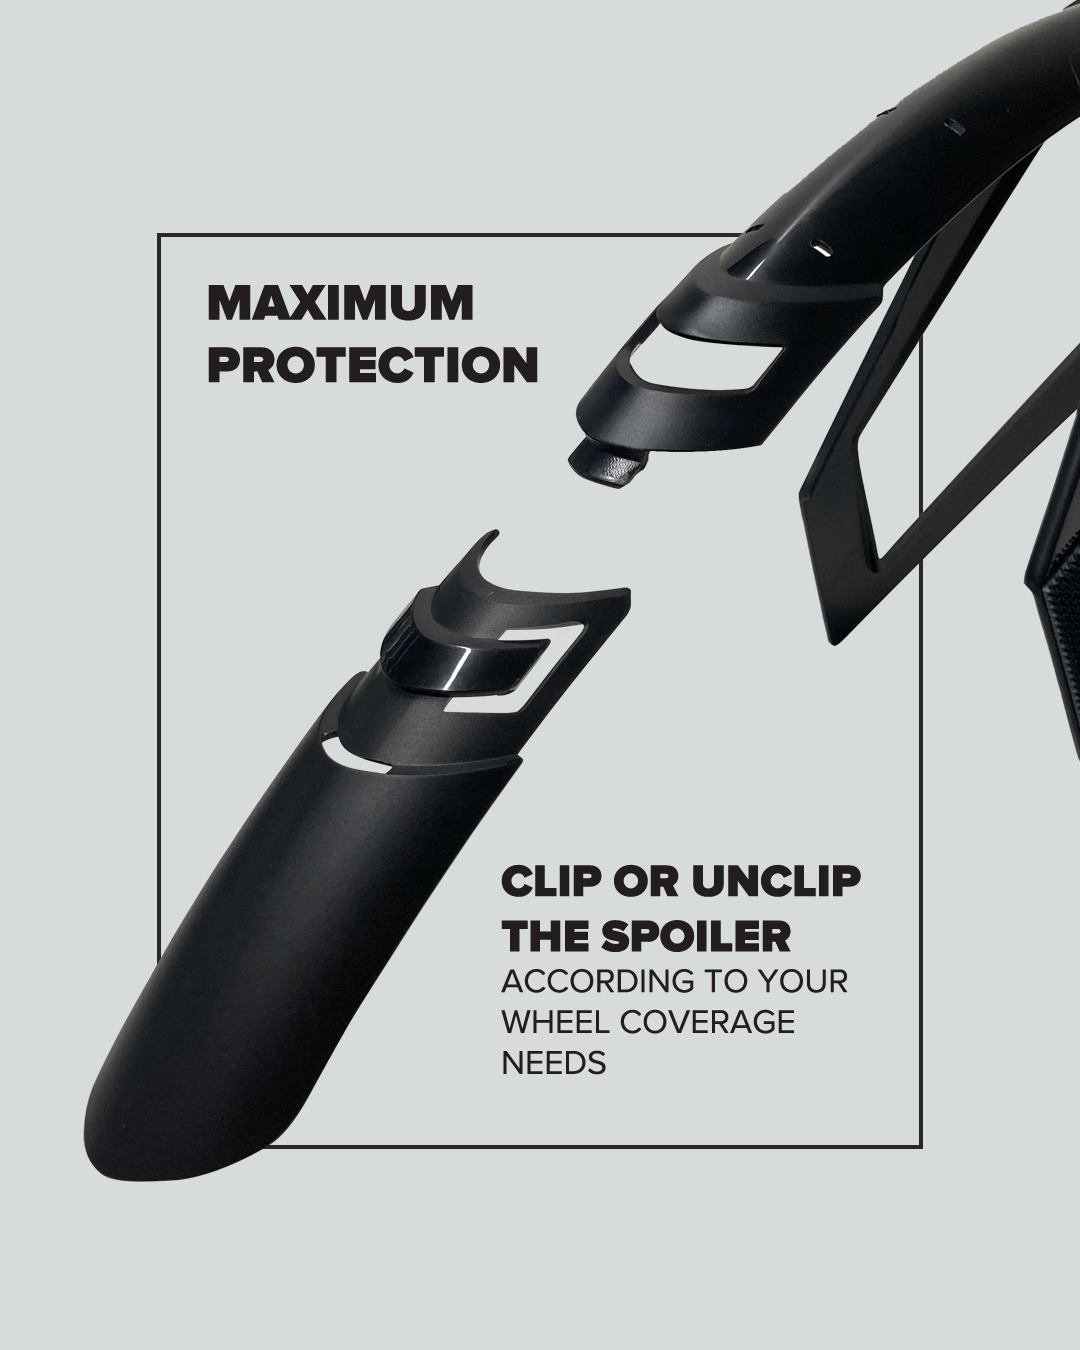 Optimal fit meets technical precision in the Polisport G-Mud Mudguard Set engineered for 28" wheels